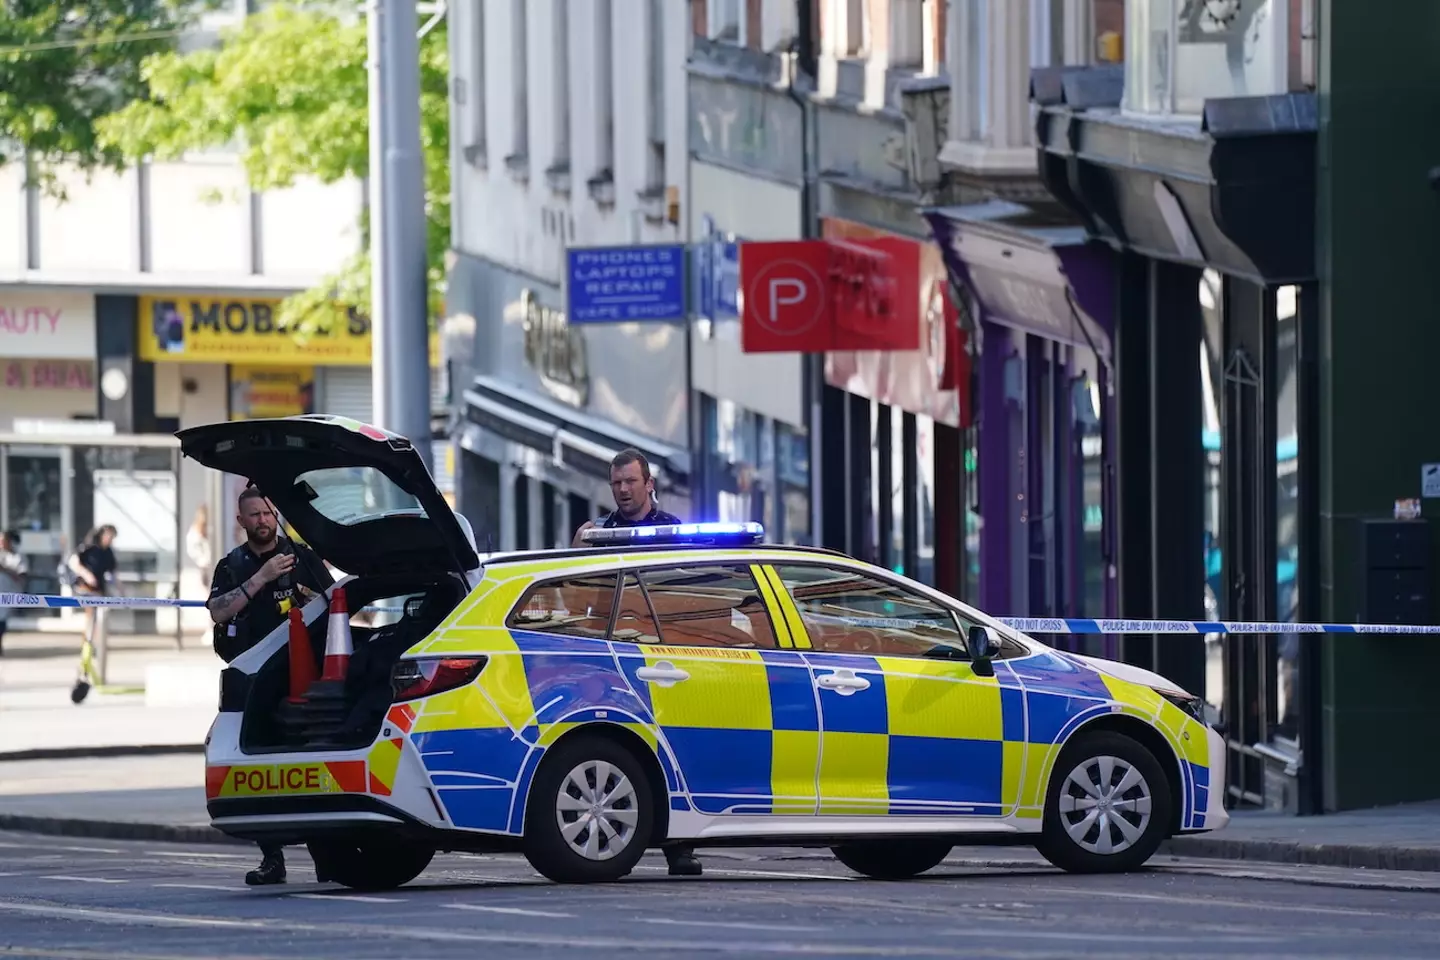 A man has been arrested on suspicion of murder after three people were killed in Nottingham.